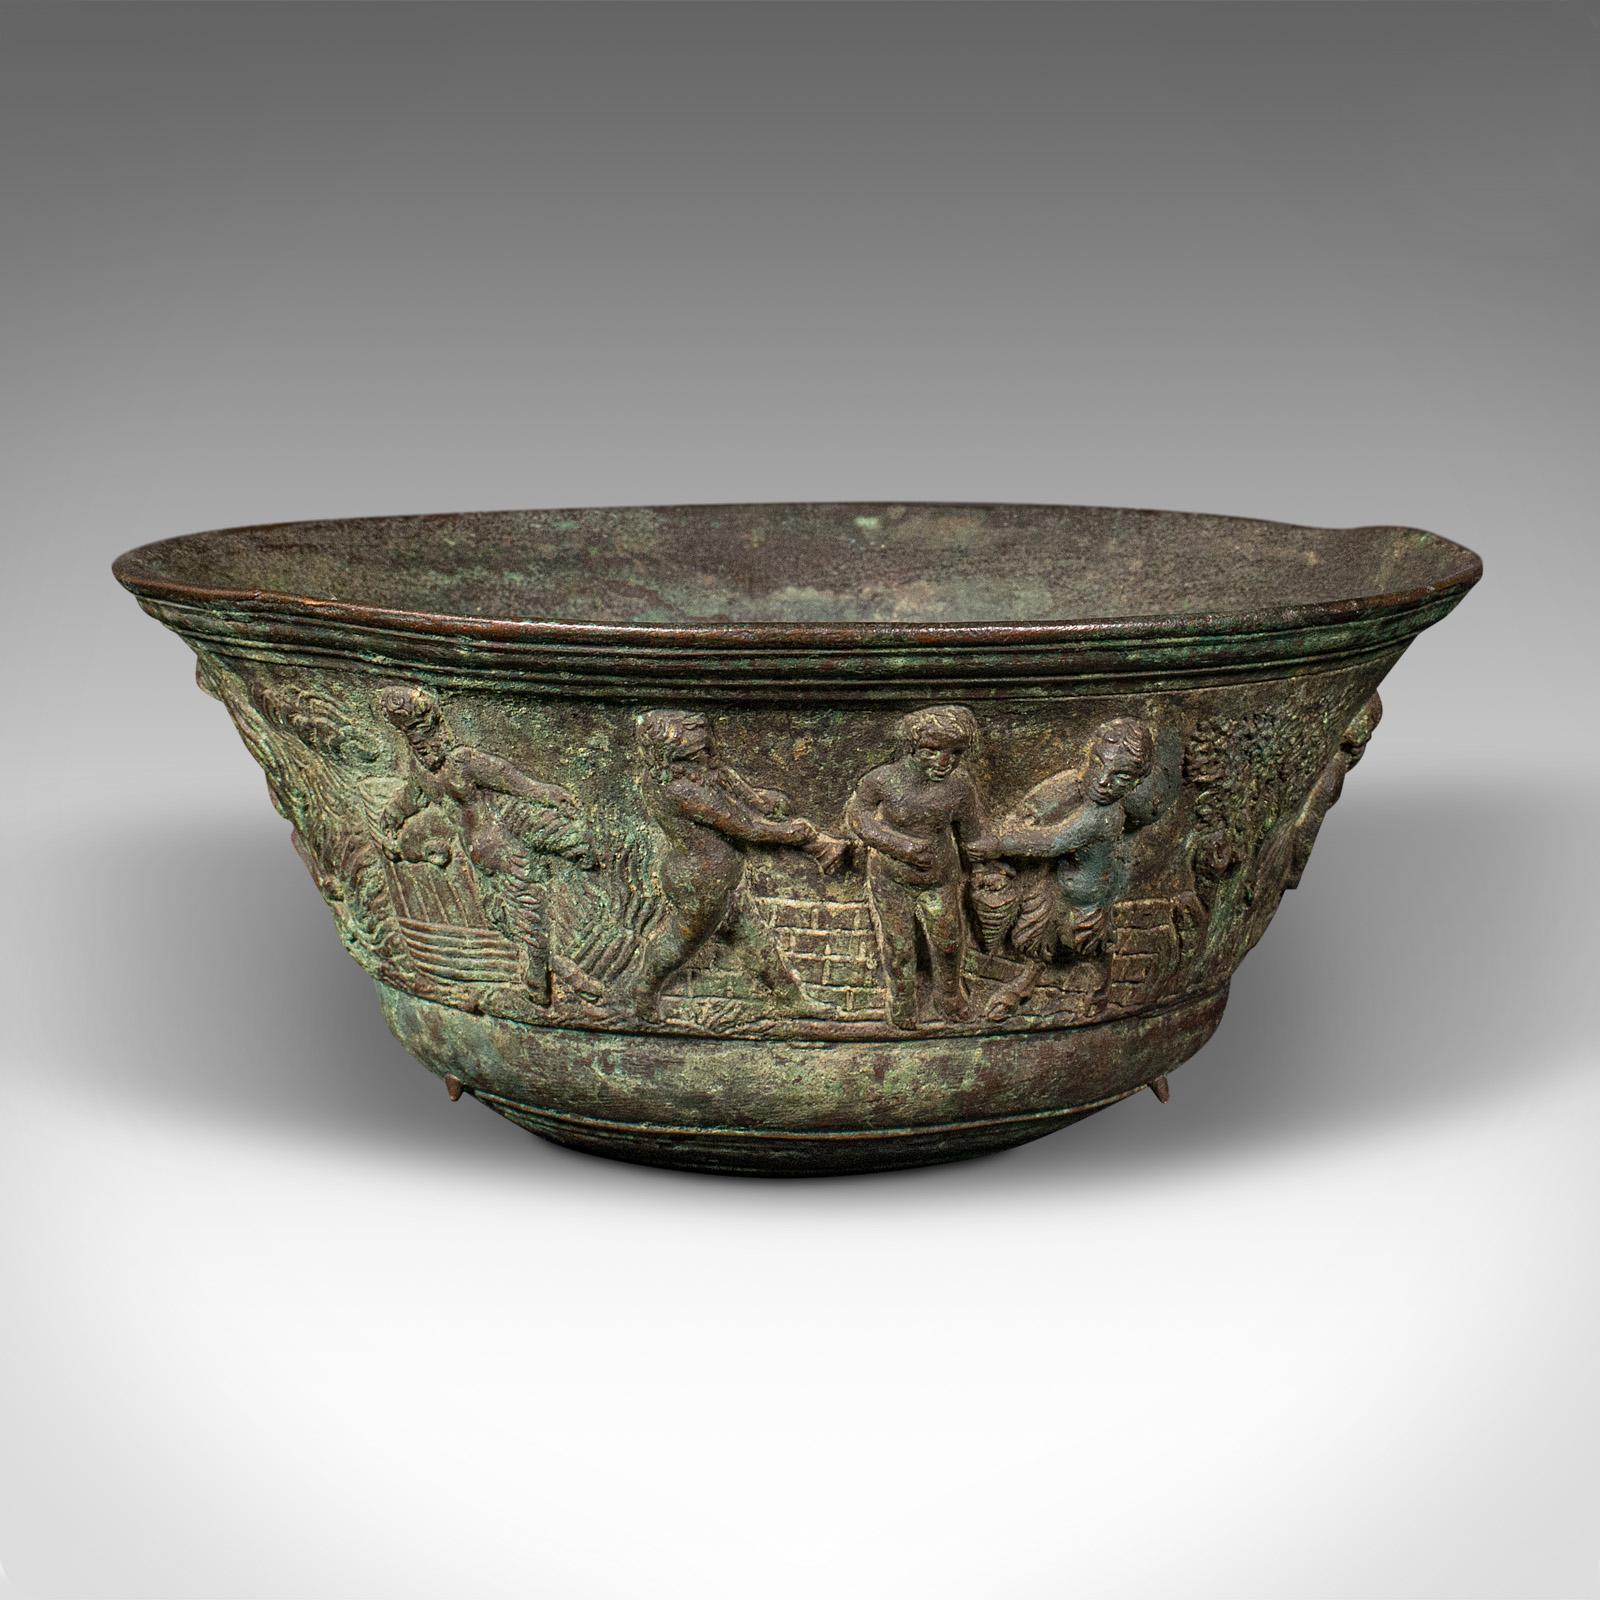 This is an antique Romanesque bowl. An Italian, bronze Grand Tour dish with Bacchanalian decor, dating to the Victorian period, circa 1860.

Fascinating classical detail accentuates this fine Grand Tour bowl
Displays a desirable aged patina and in